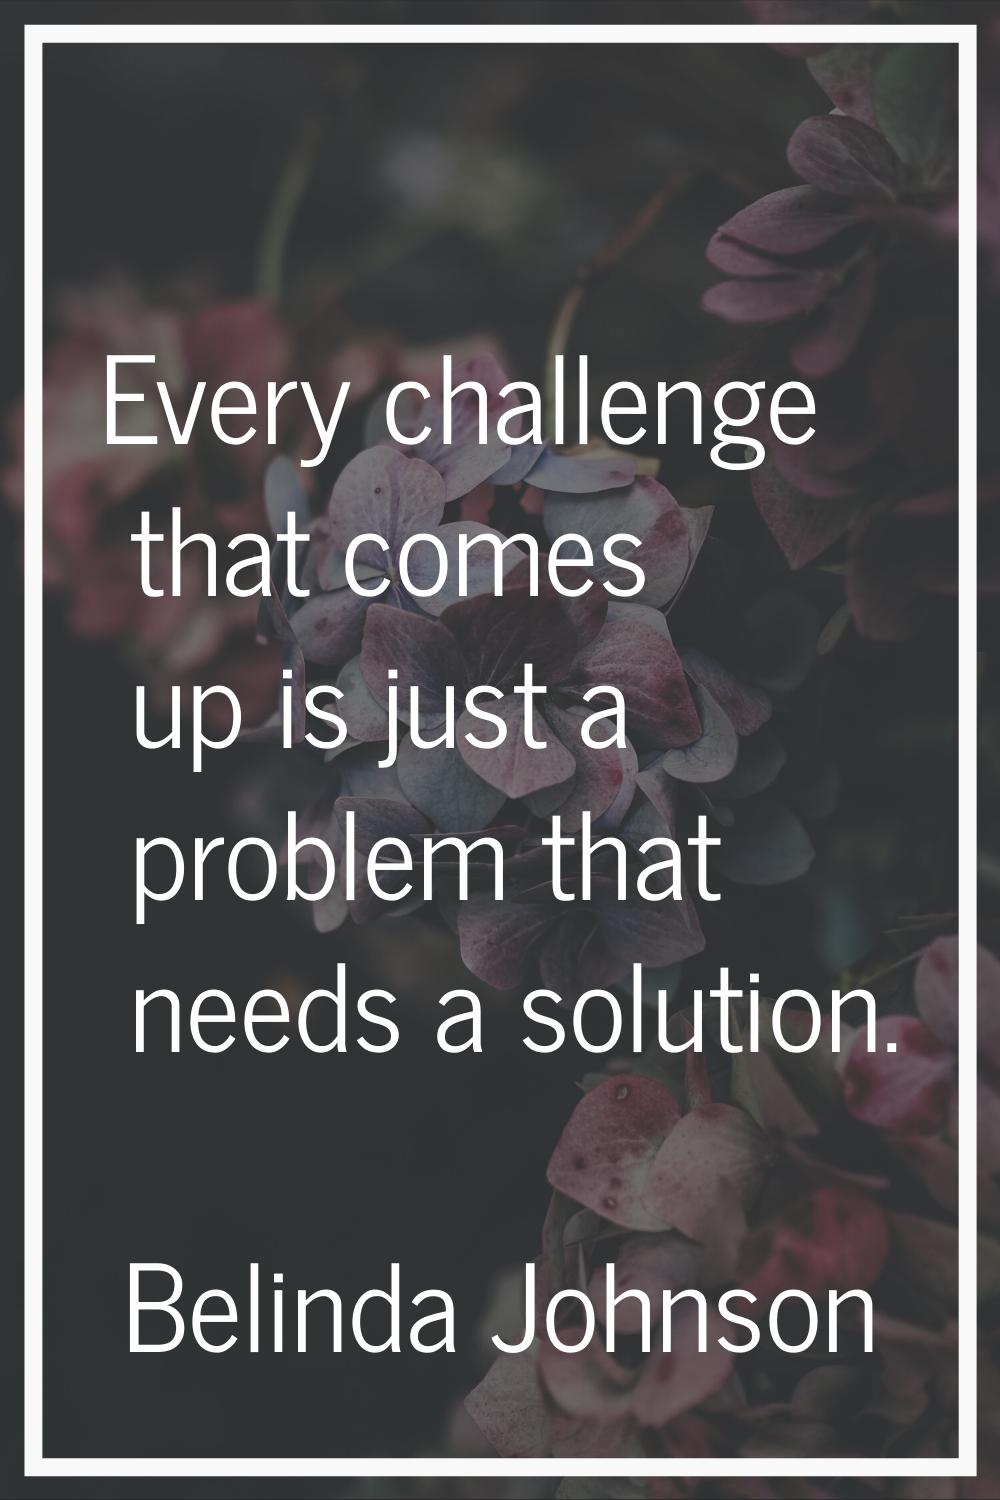 Every challenge that comes up is just a problem that needs a solution.